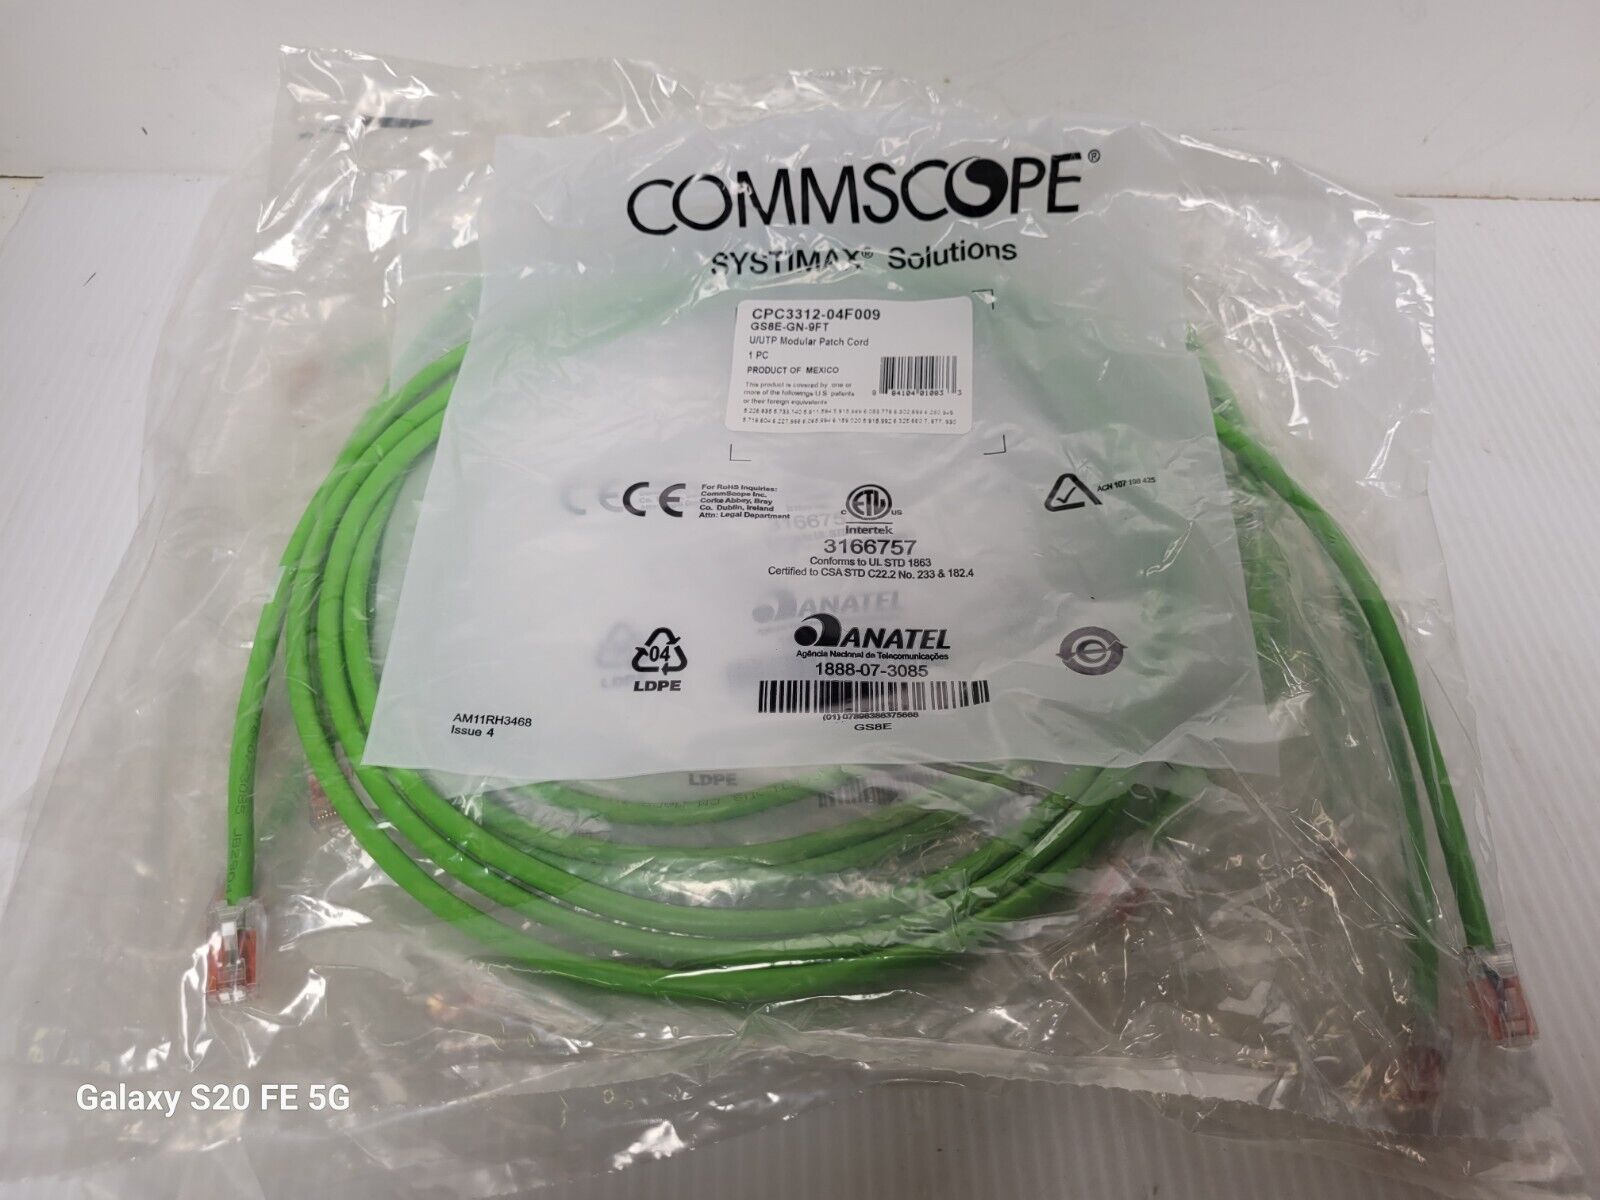 Lot of 5 Commscope Systimax 9FT Ethernet U/UTP Modular Patch Cords GS8E-GN-9FT